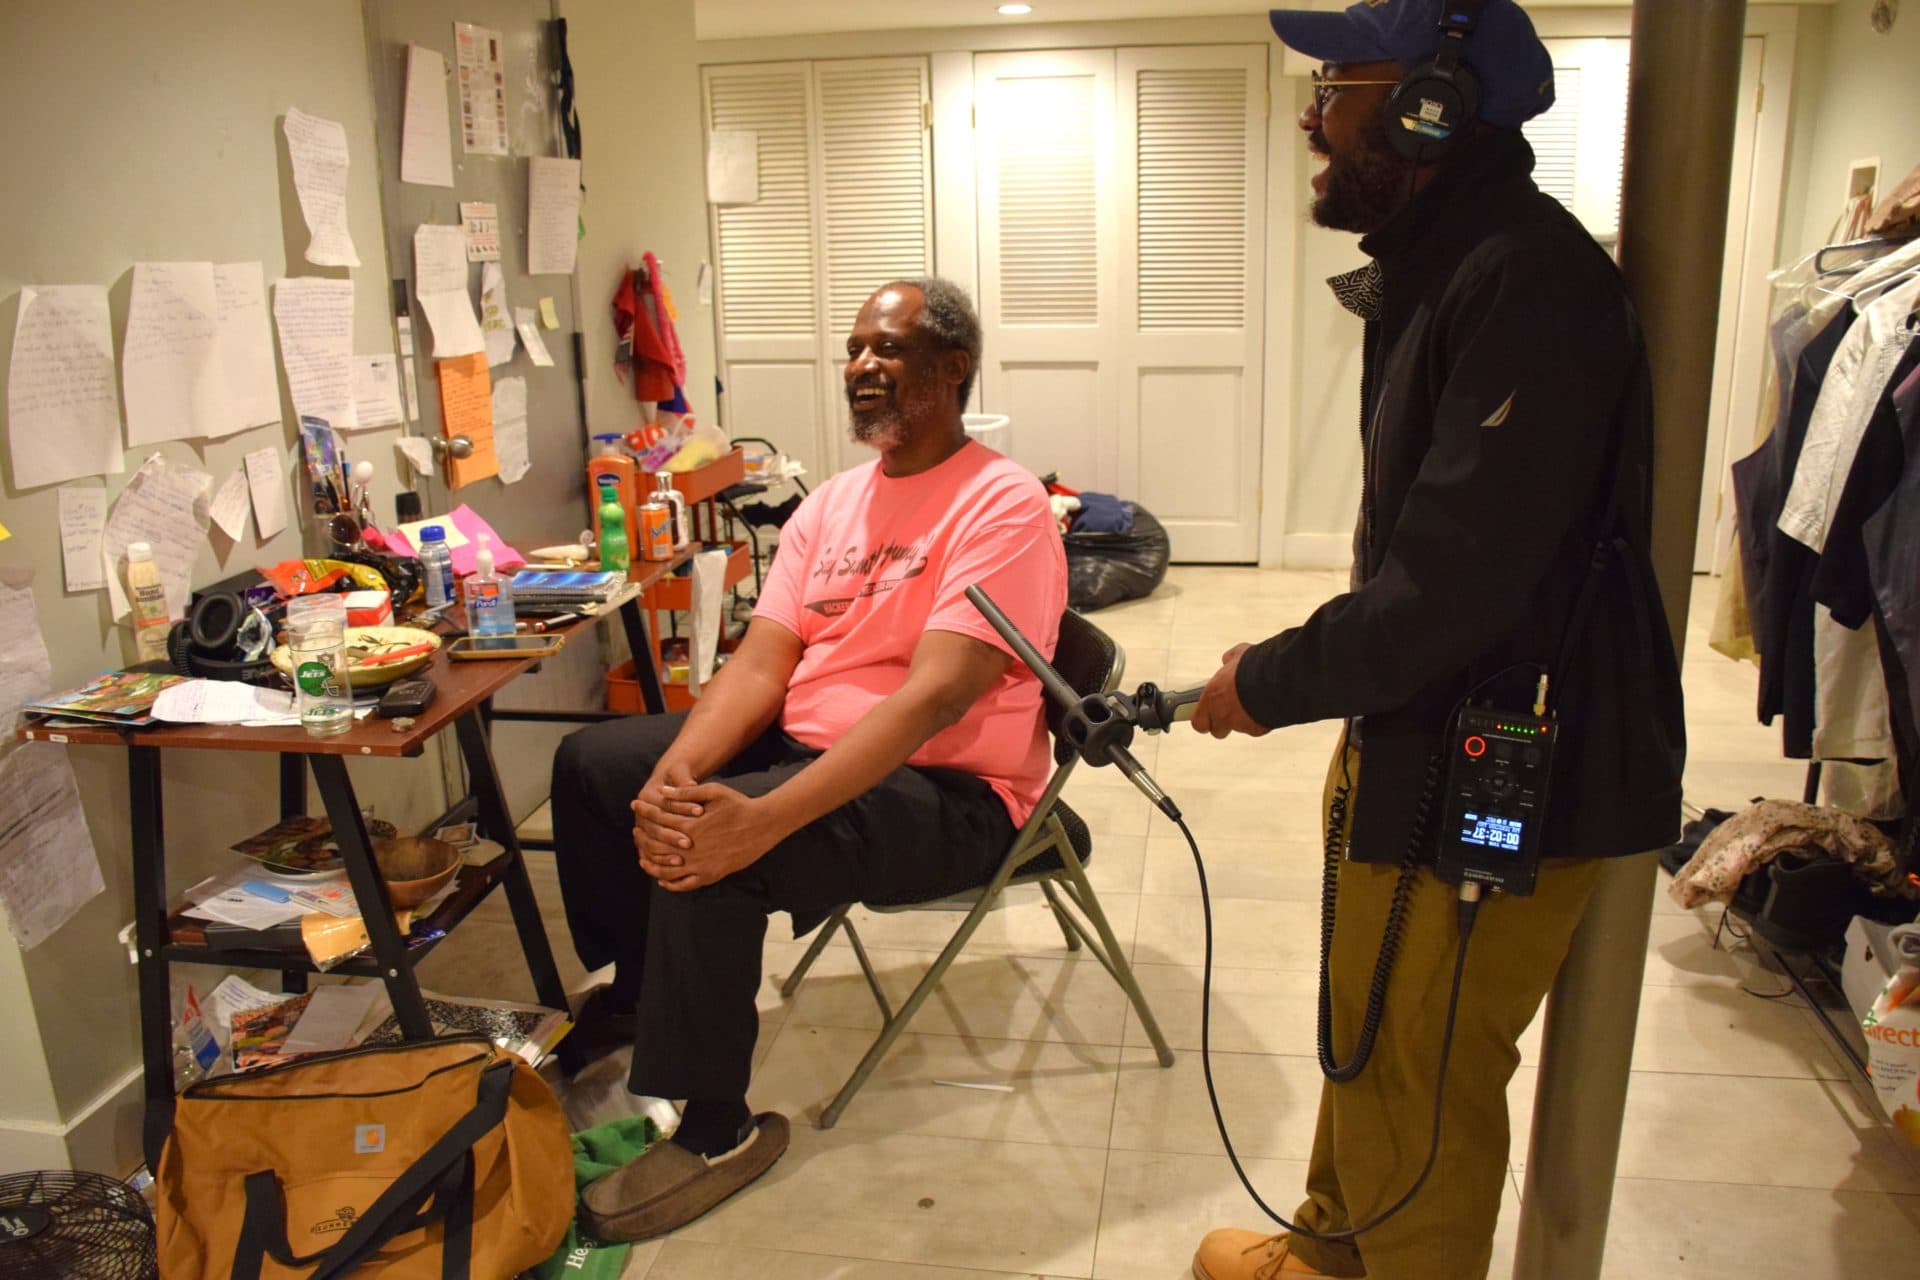 Producer Quincy Walters interviews Tino in his basement bedroom in Brooklyn, NY.